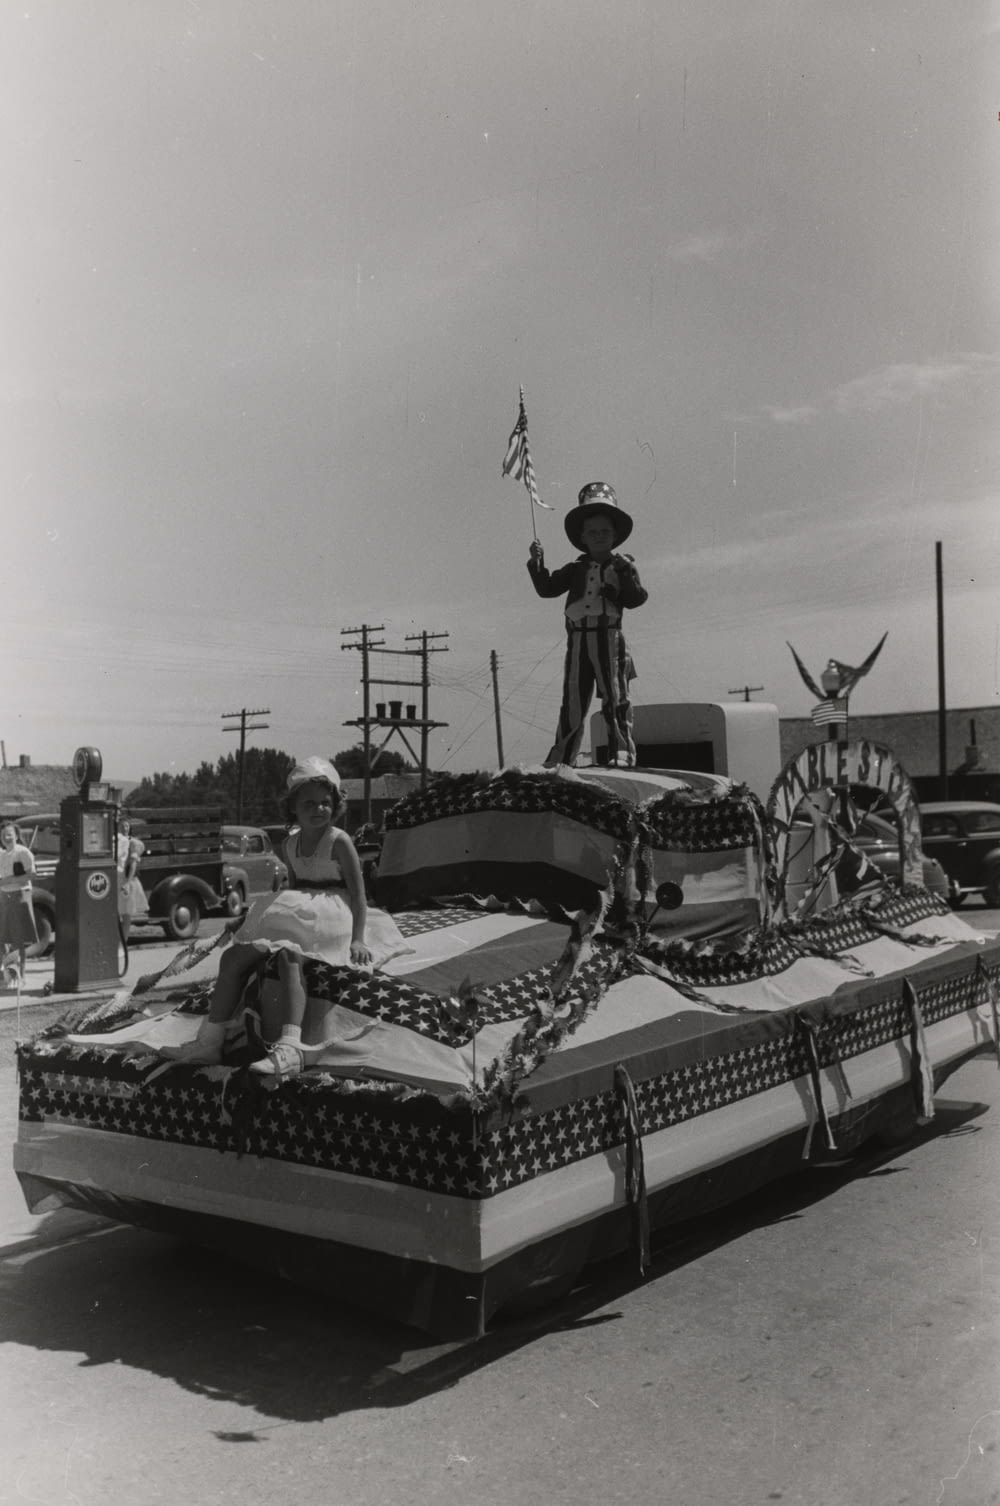 grayscale photography of children riding a USA-themed float